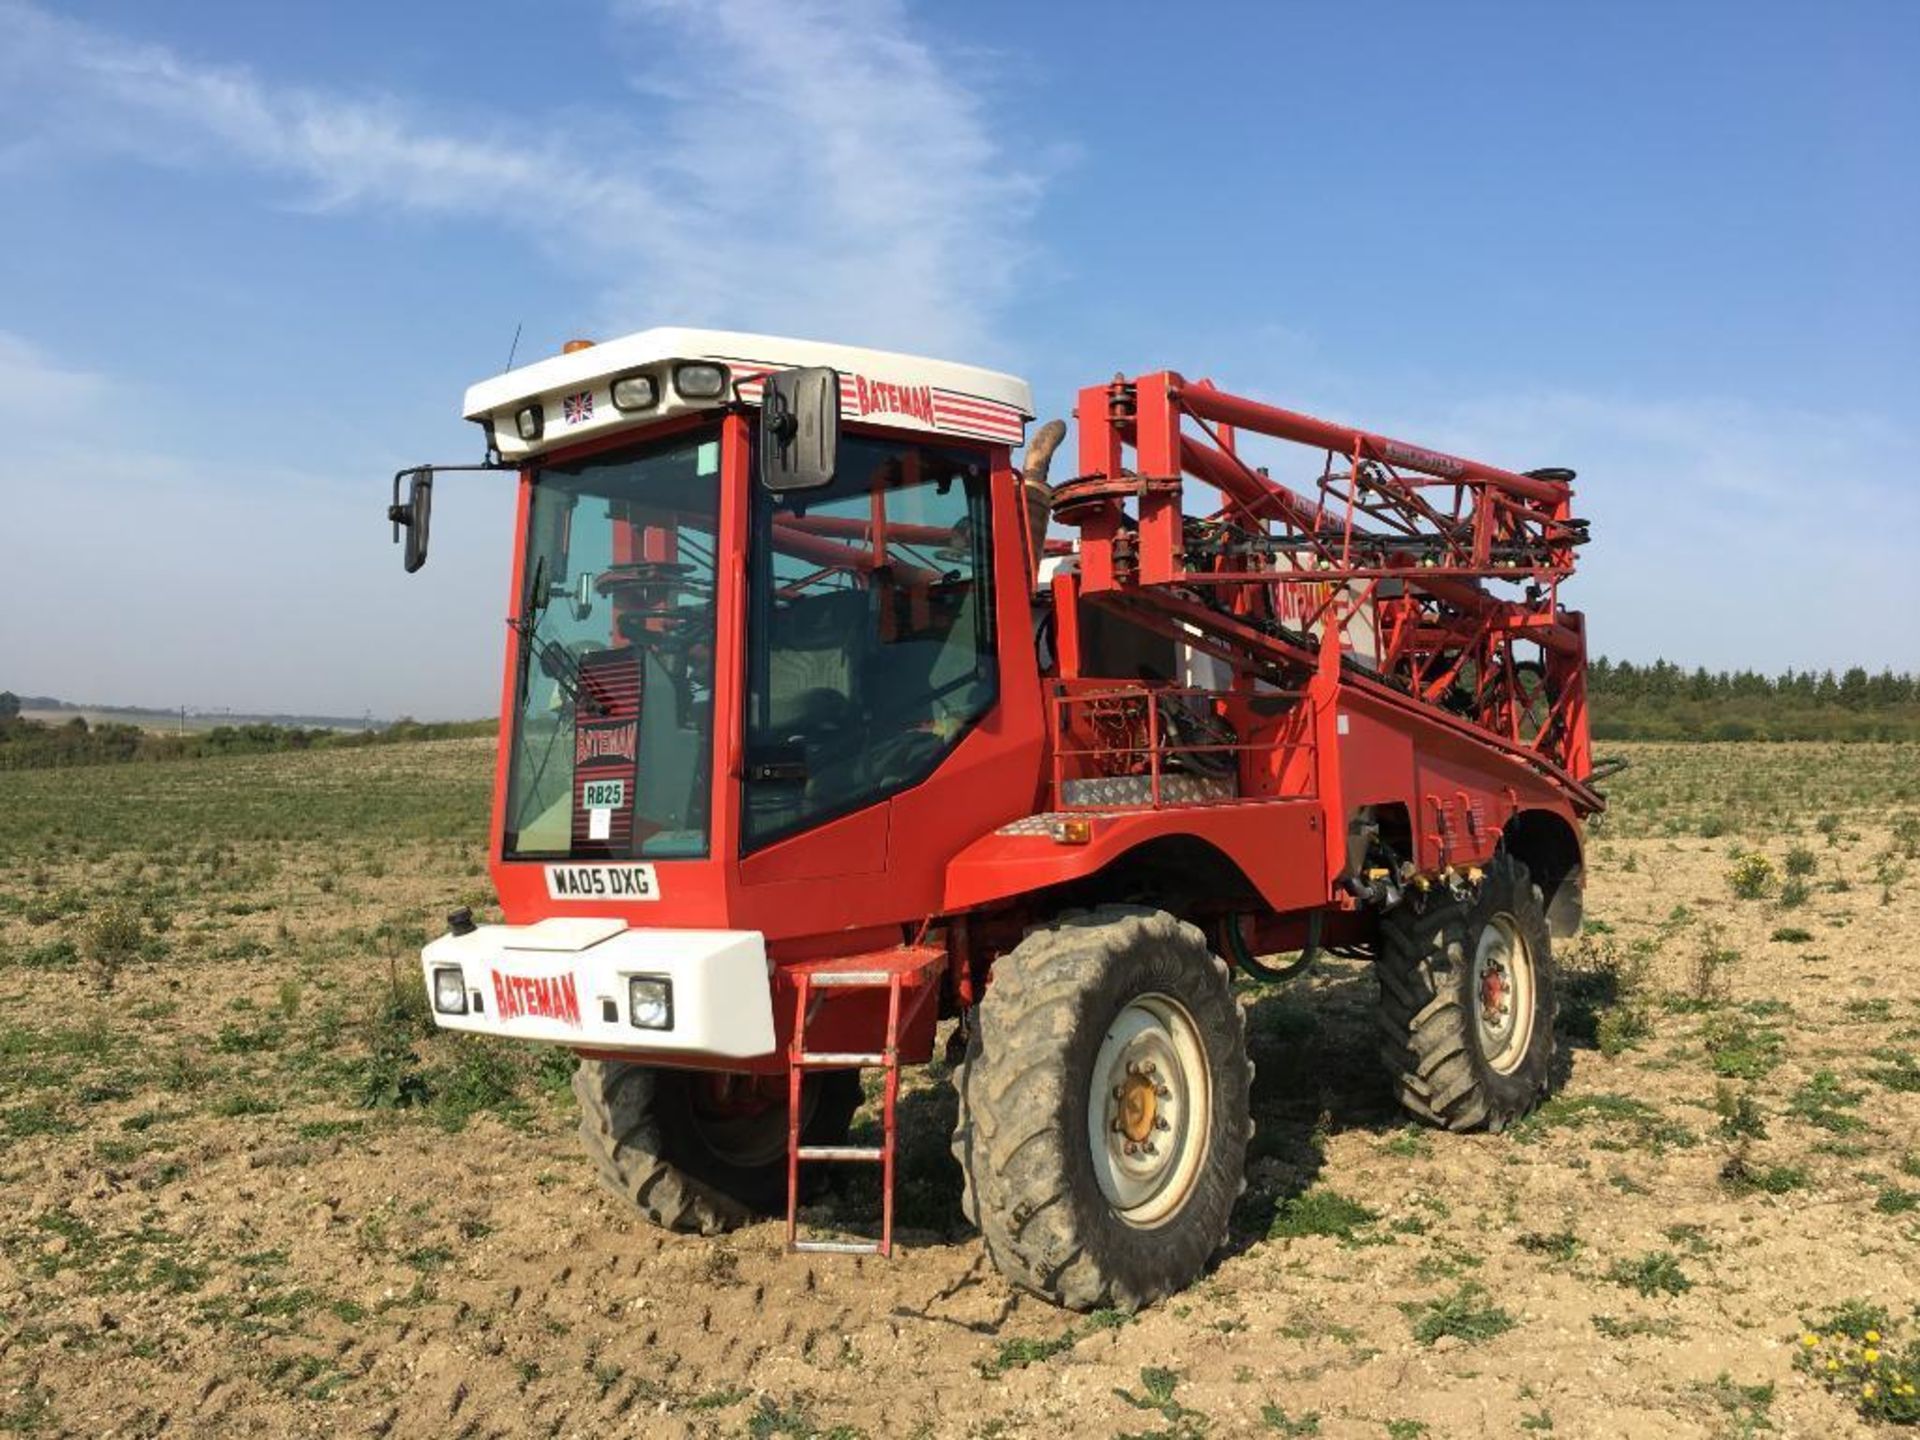 2005 Bateman RB25 24m self-propelled sprayer with 3000L tank, VG booms, triple nozzle bodies on 380/